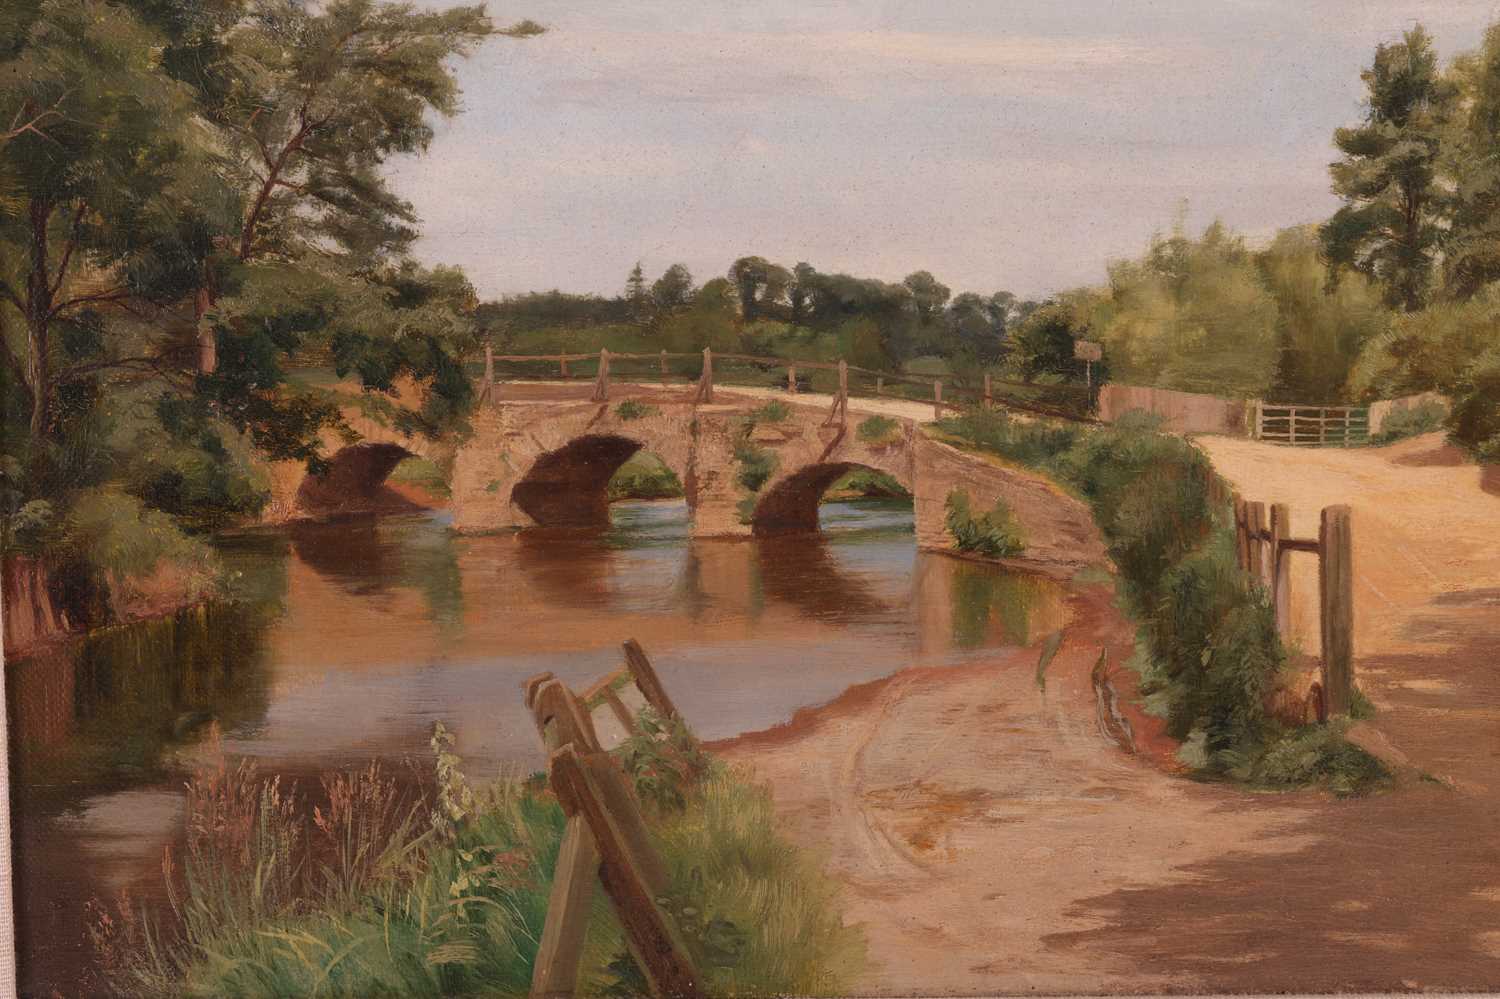 Charles Low (1840 - 1906), The Village Ford, Eashing, Surrey, signed, oil on canvas, 32.5 x 49 cm, f - Image 4 of 8